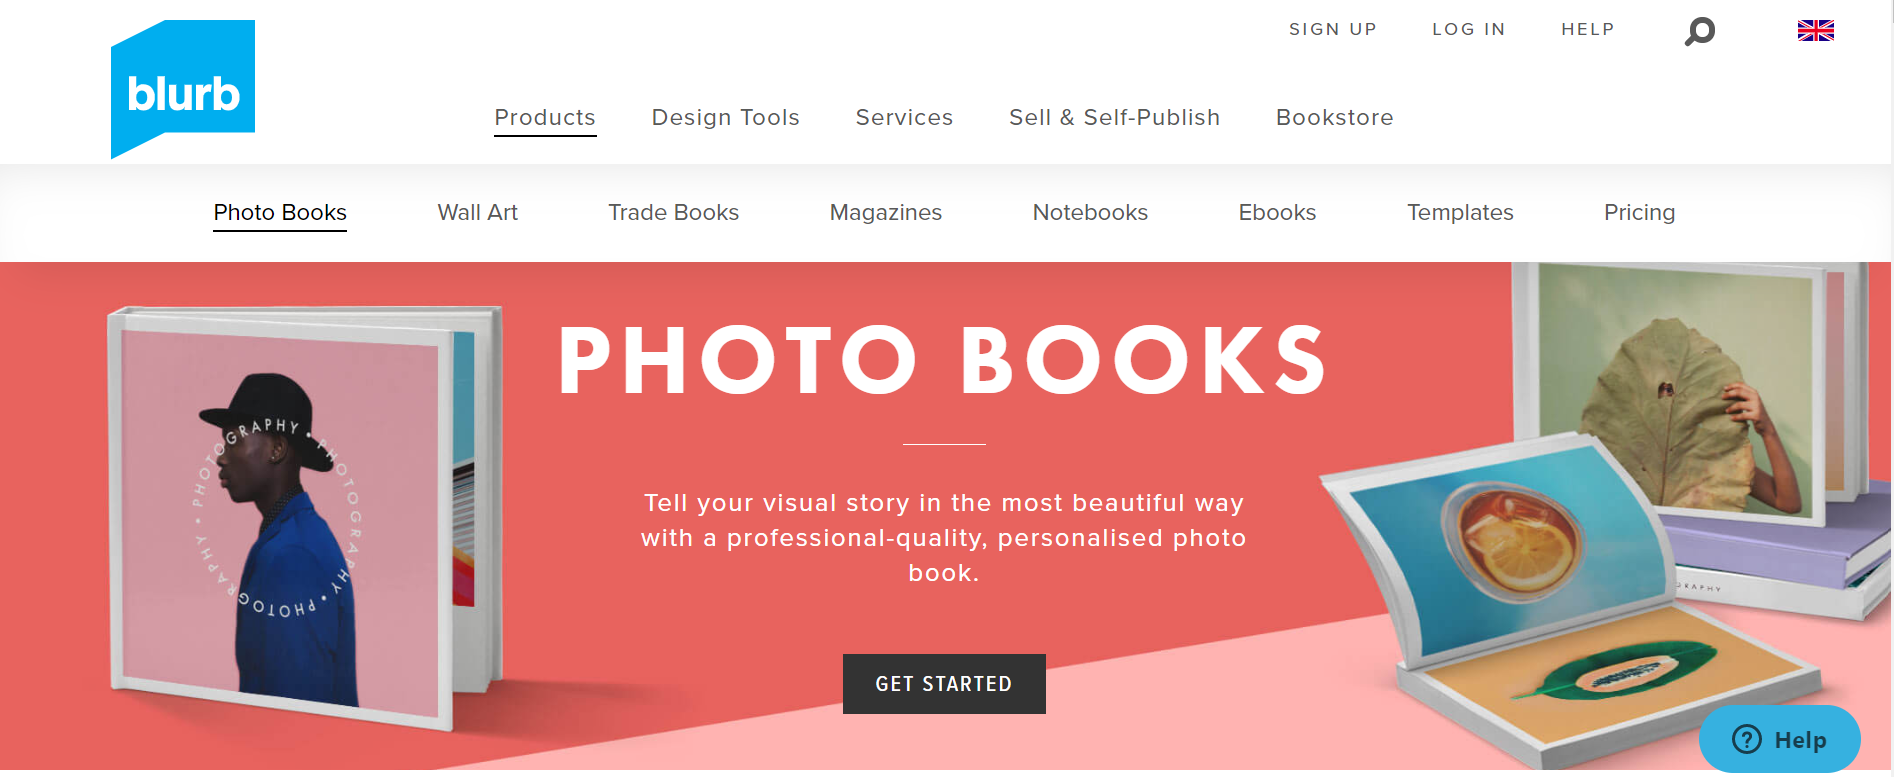 Blurb co uk professional photo book get started page